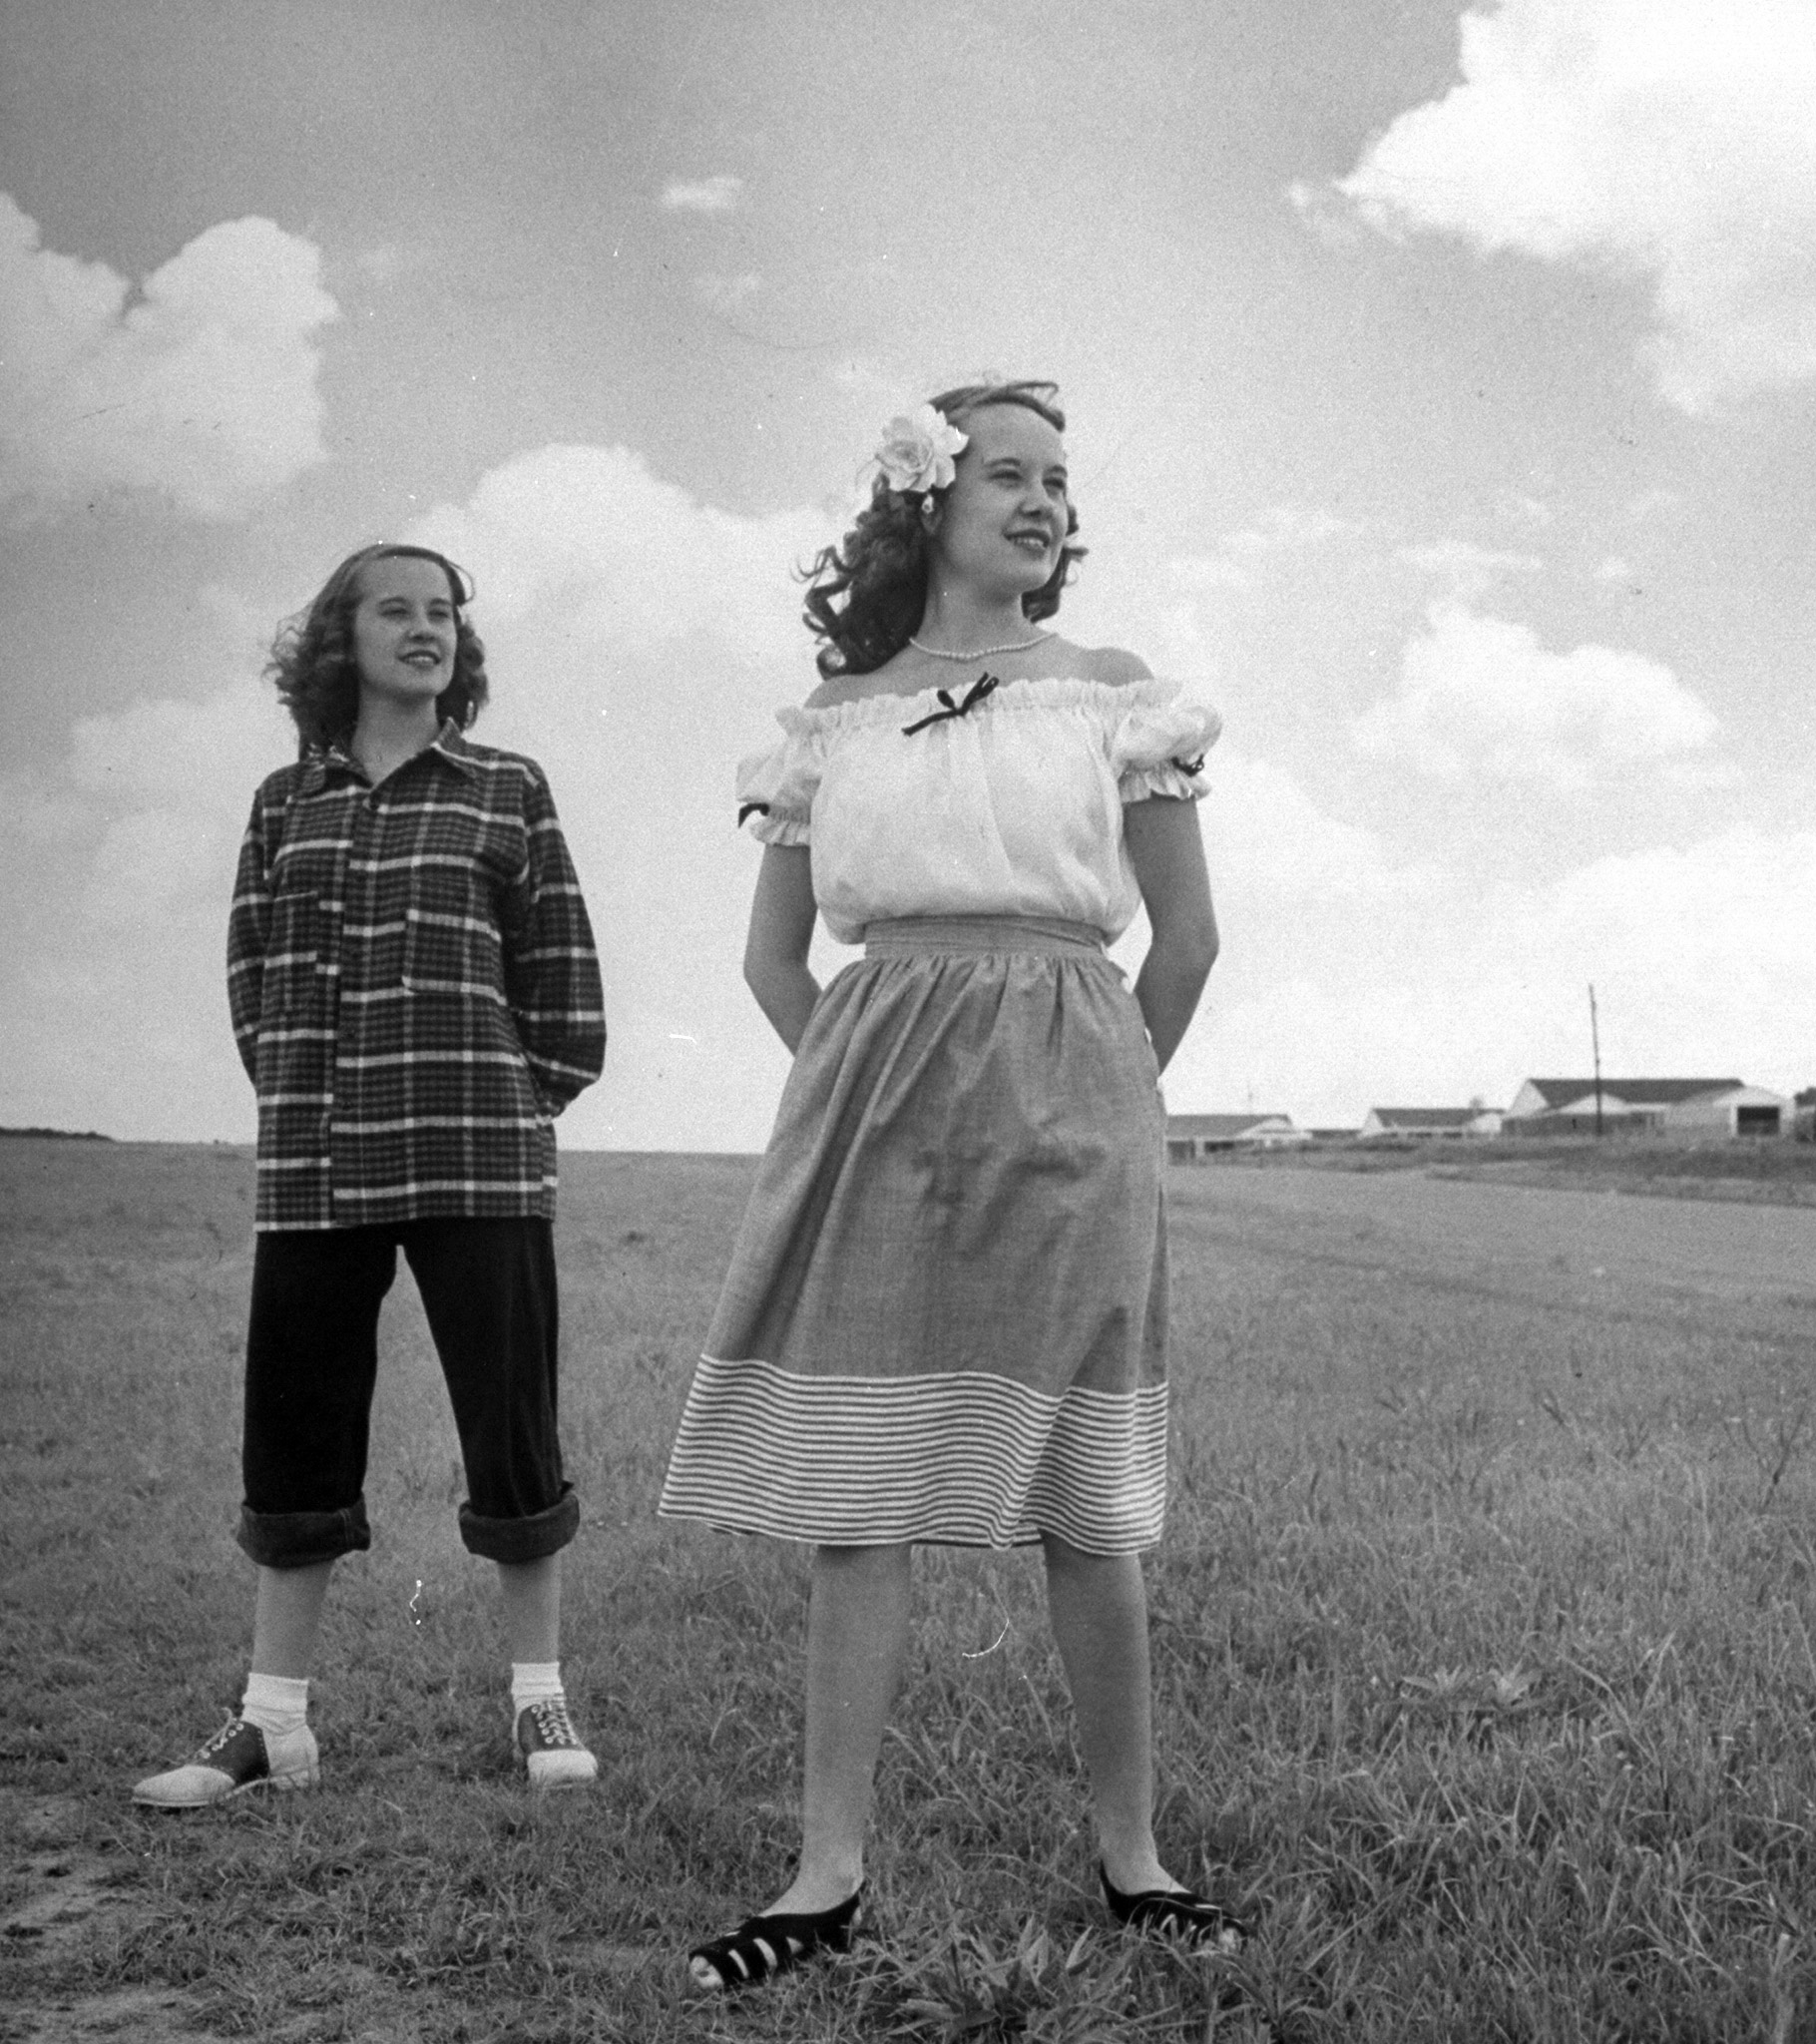 Contrasts in teen-age clothes are shown by Betty Bounds (right), wearing a dainty 1947 outfit, while Barbara poses in sloppy get-up.